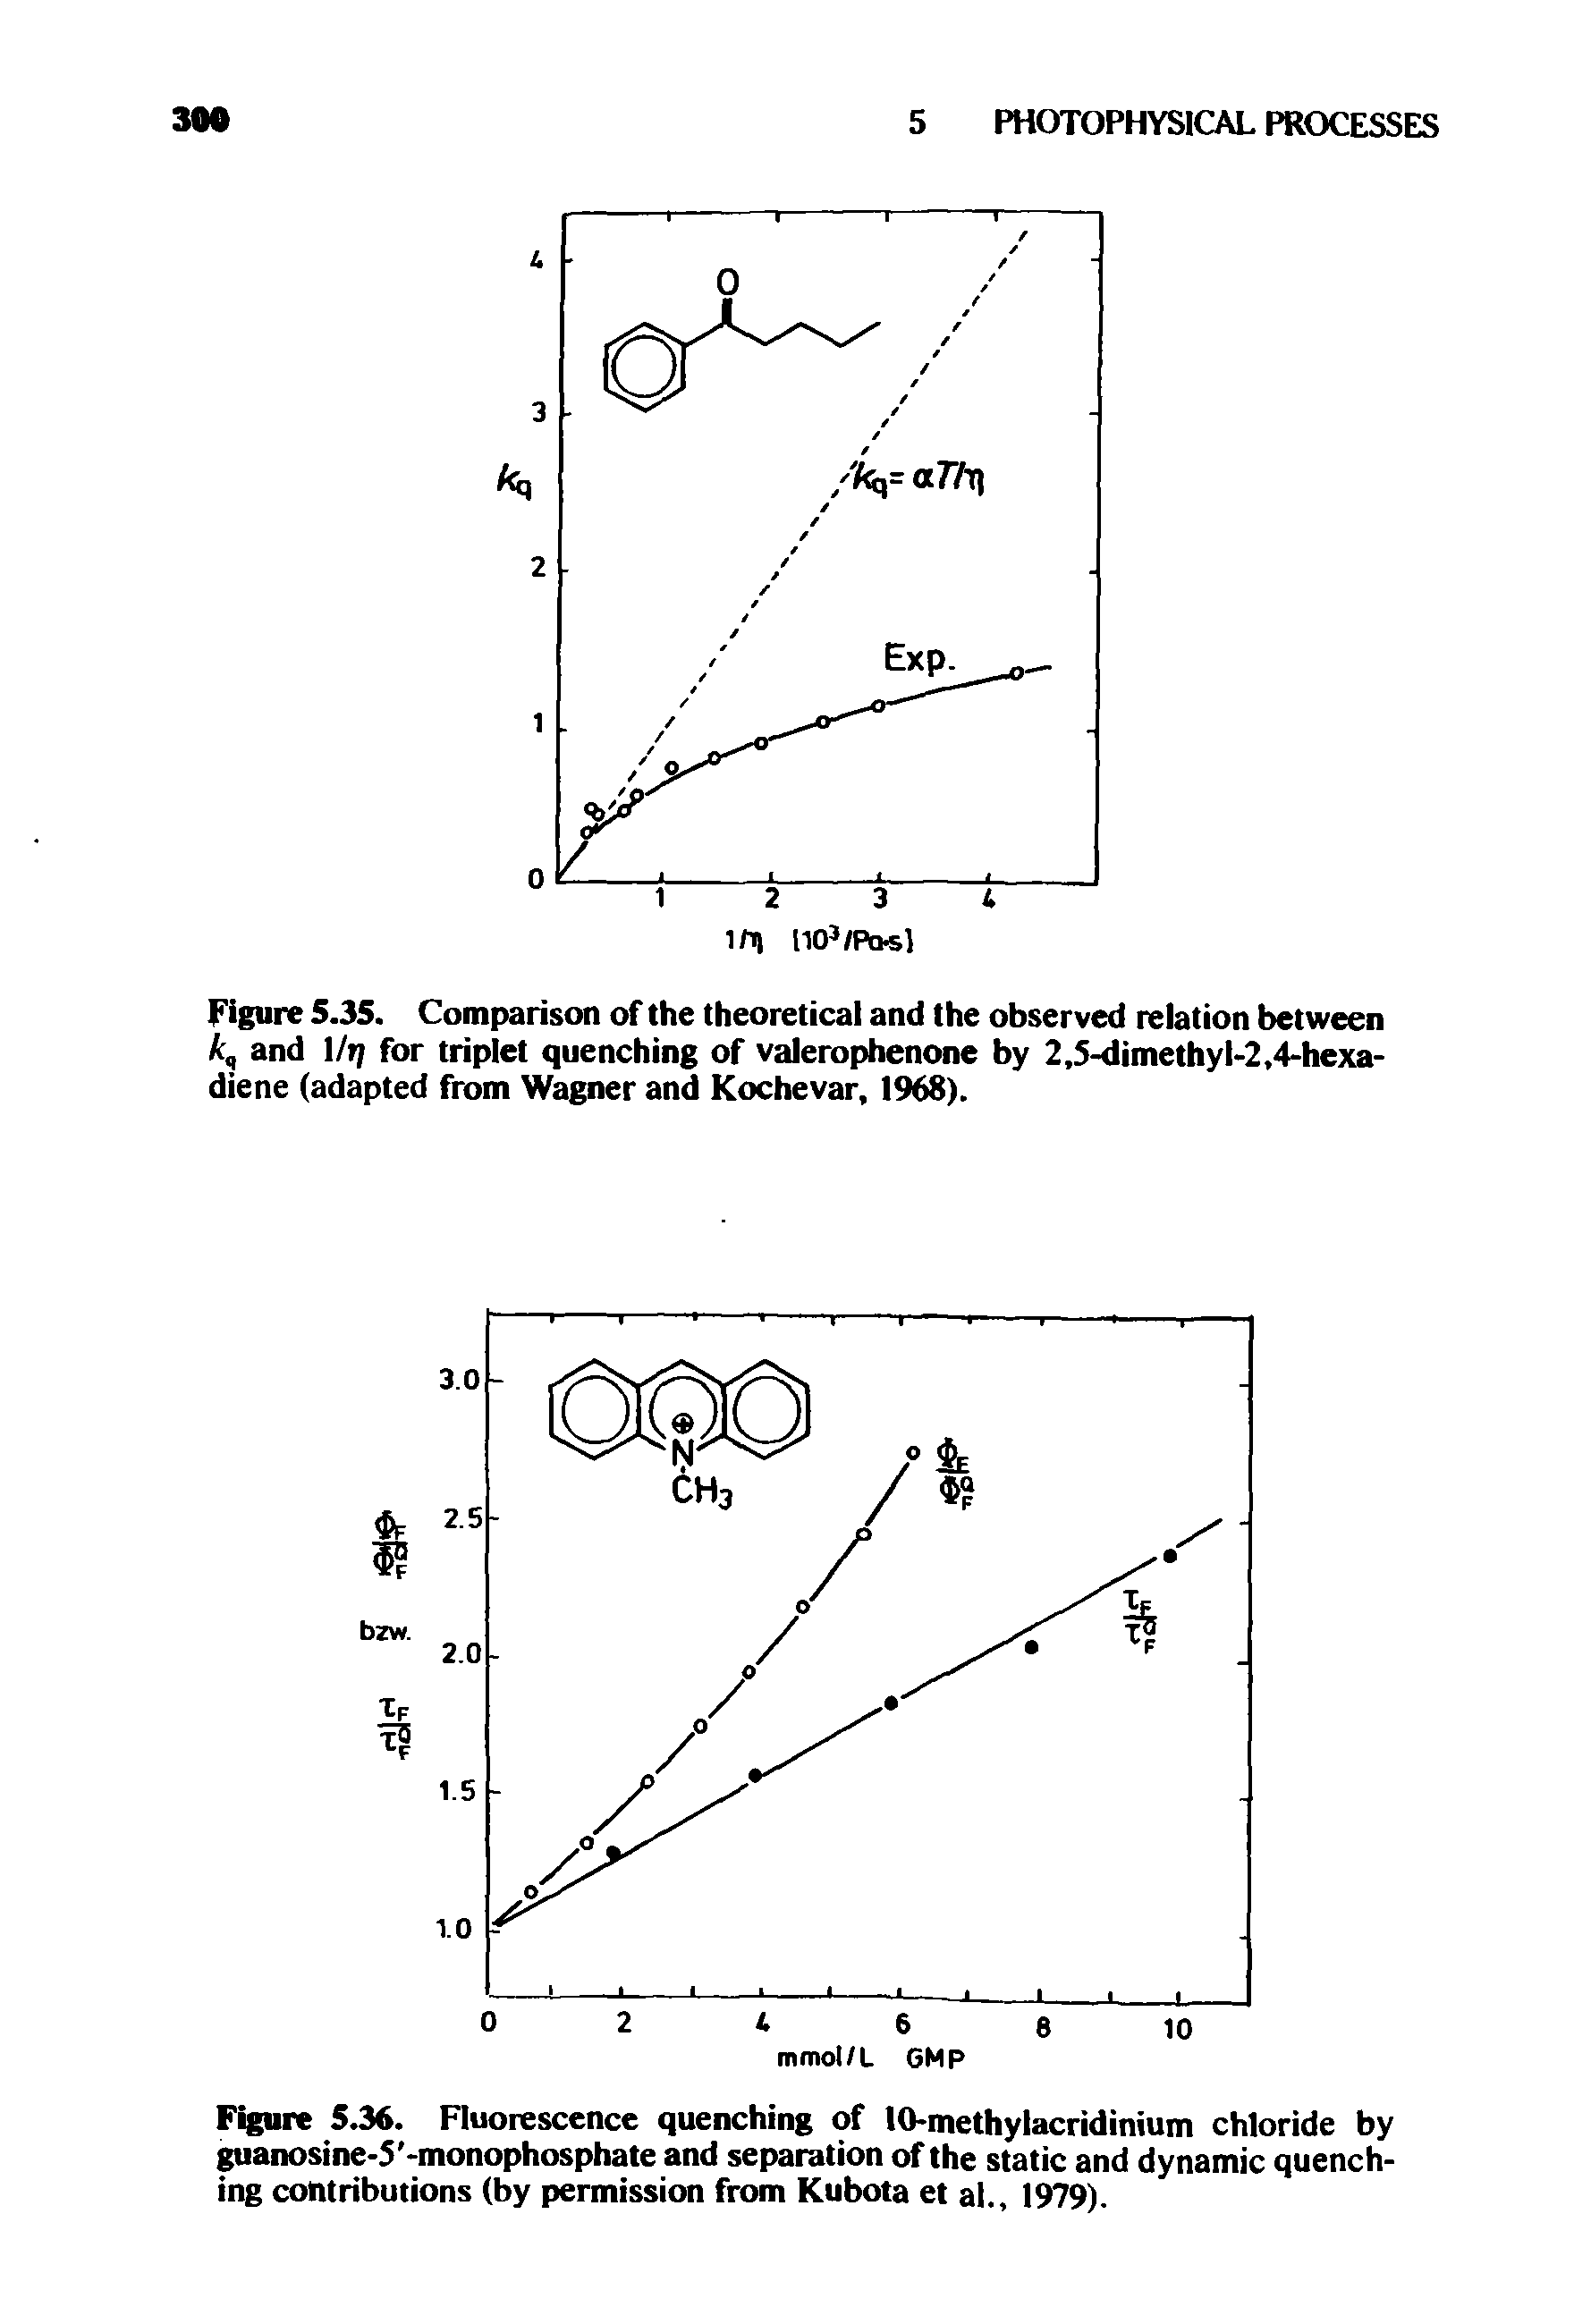 Figure 5.35. Comparison of the theoretical and the observed relation between and I/r for triplet quenching of valerophenone by 2,S-dimethyl-2,4-hexa-diene (adapted from Wagner and Kochevar, 1968).